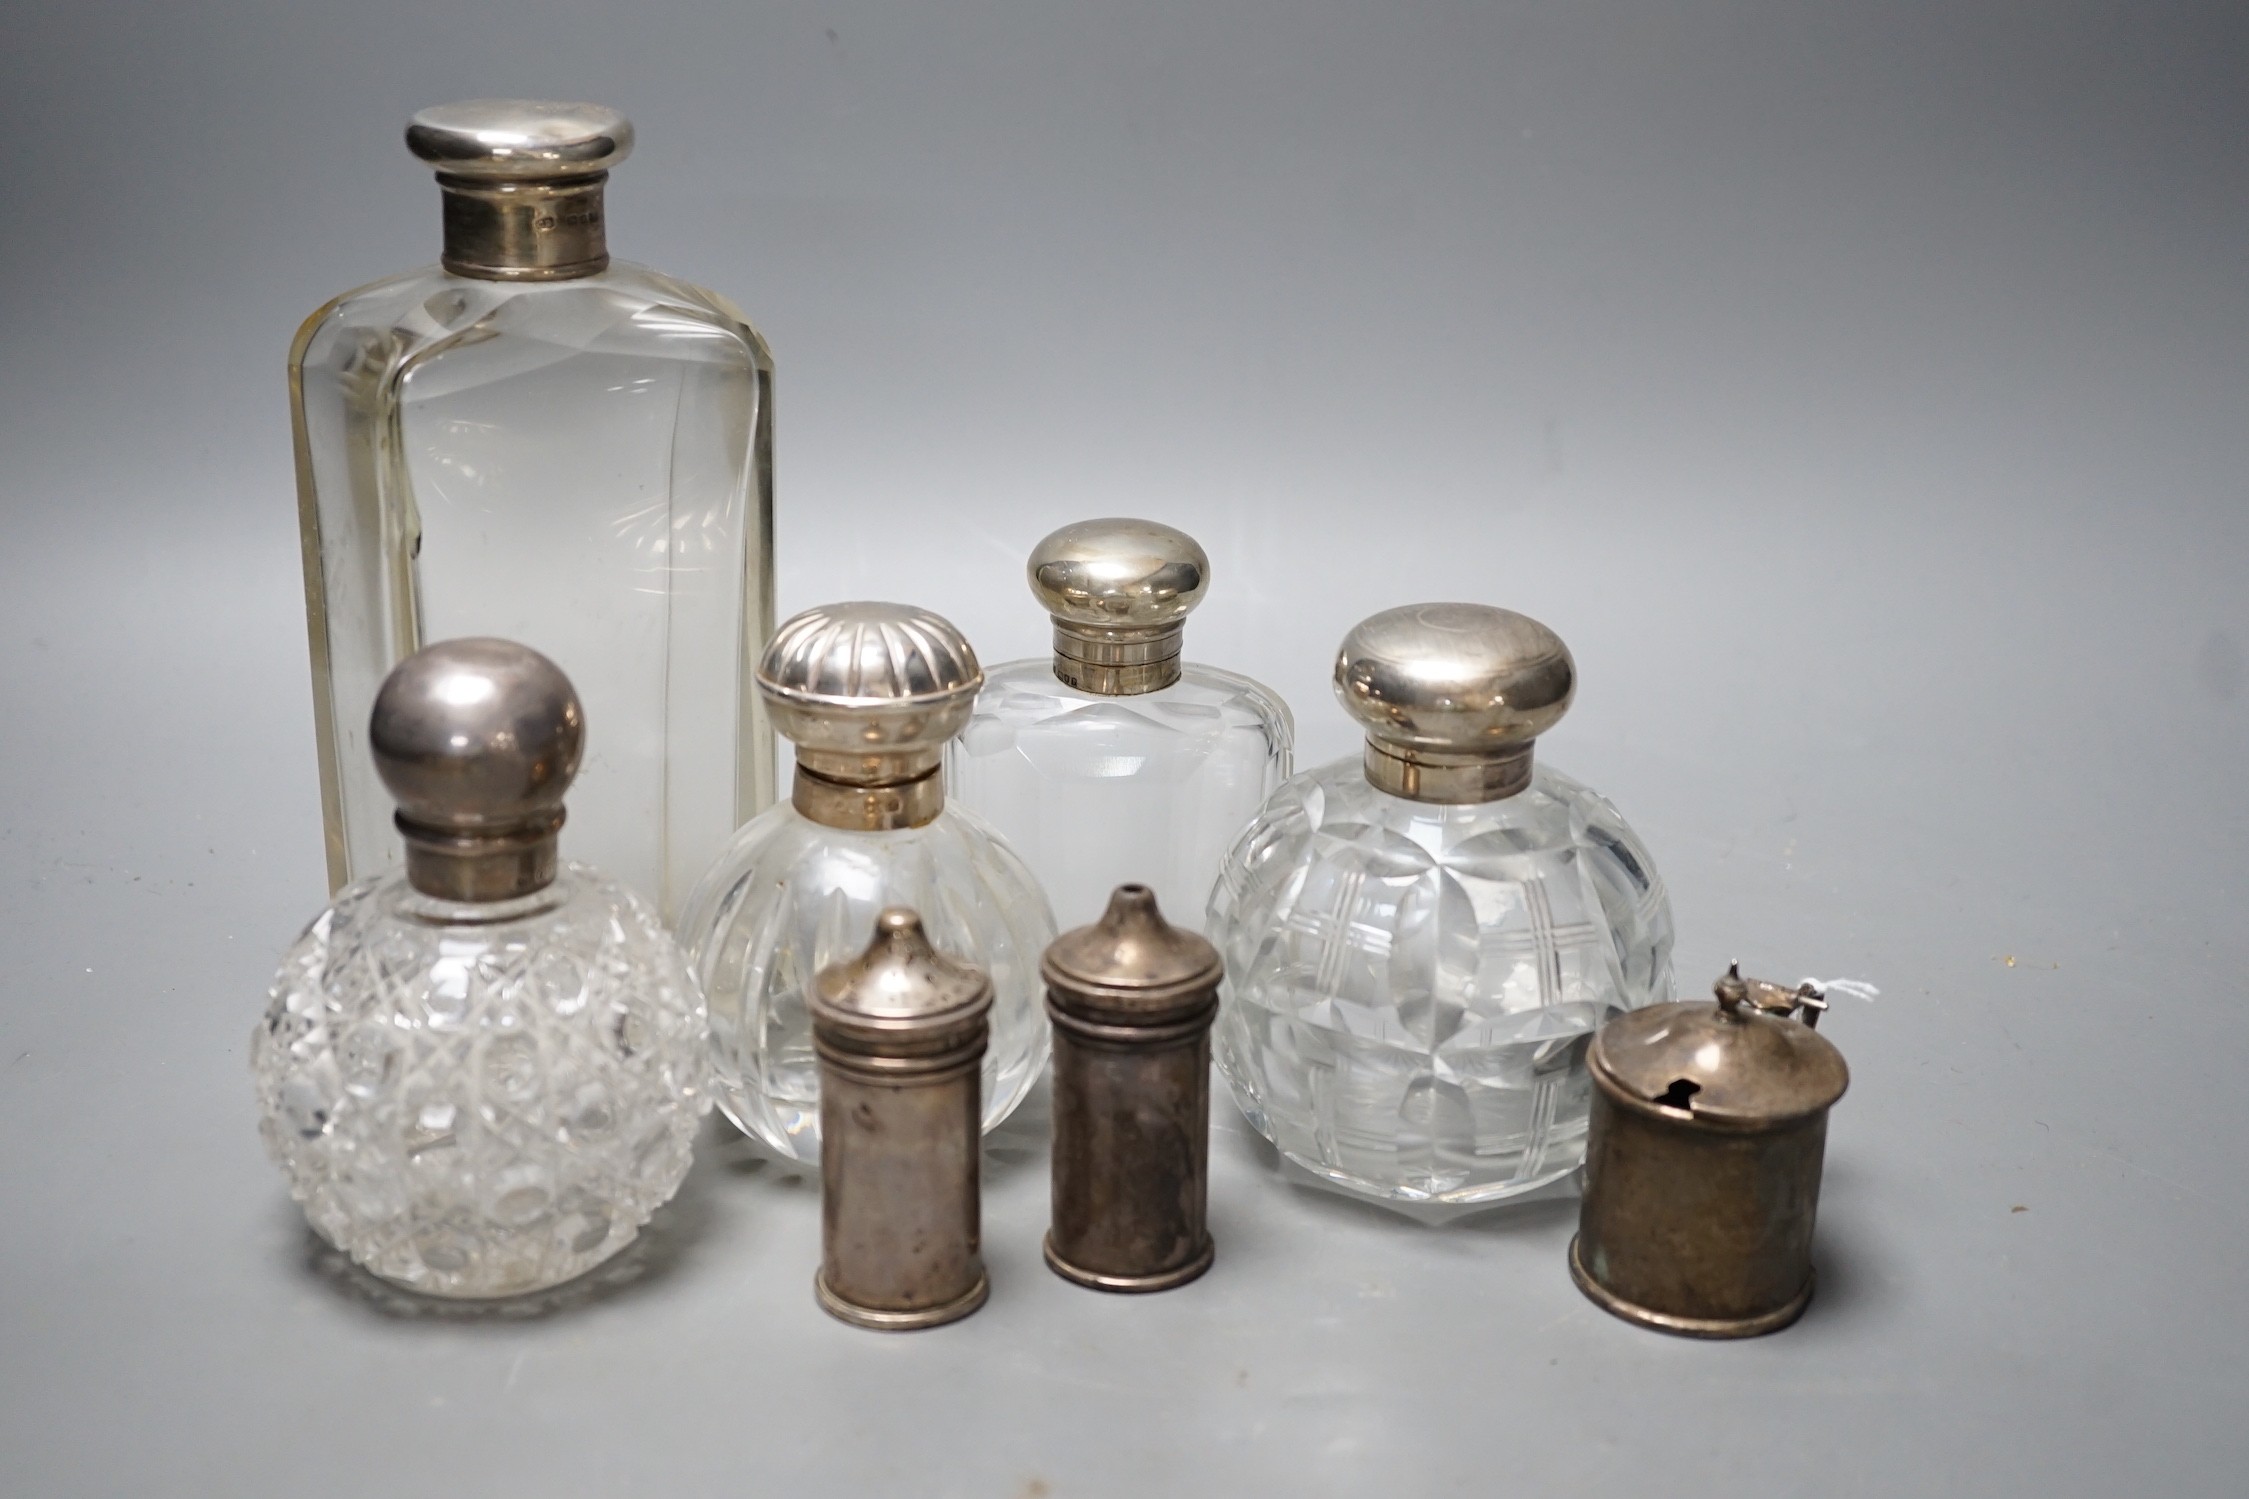 Three silver mounted glass scent bottles, a large silver mounted glass toilet bottle and three silver condiments.